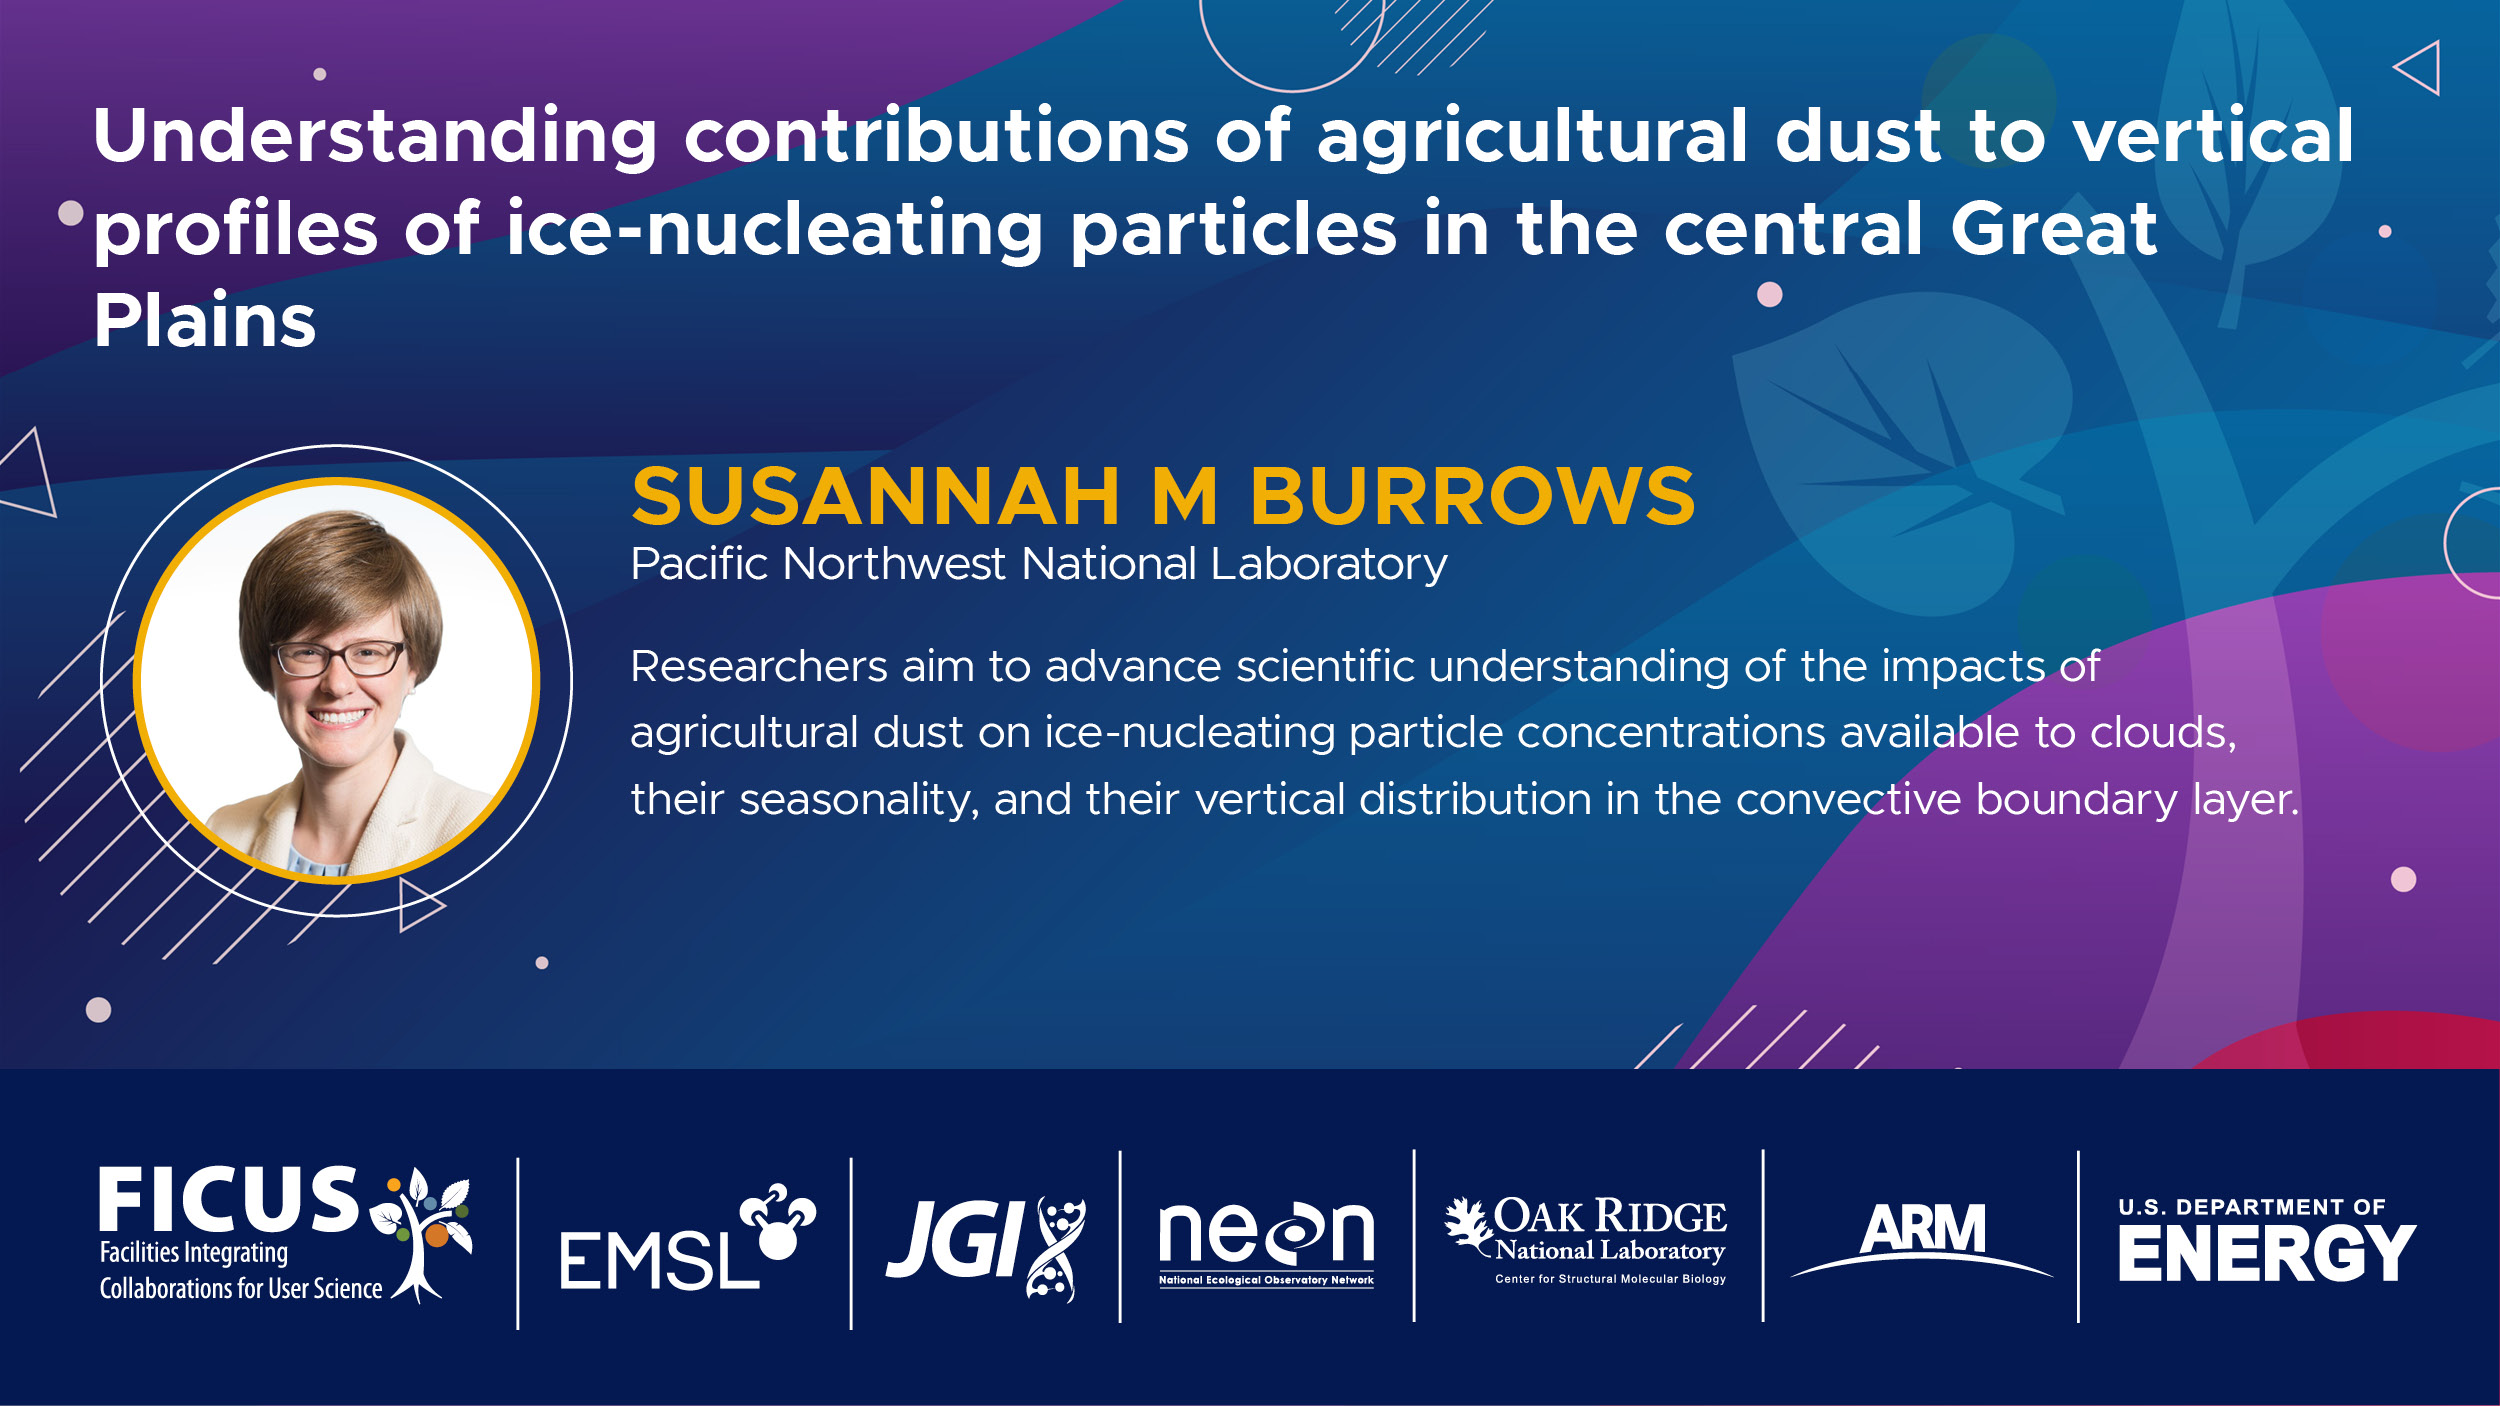 This card introduces Susannah Burrows' FICUS project, "Understanding contributions of agricultural dust to vertical profiles of ice-nucleating particles in the central Great Plains."